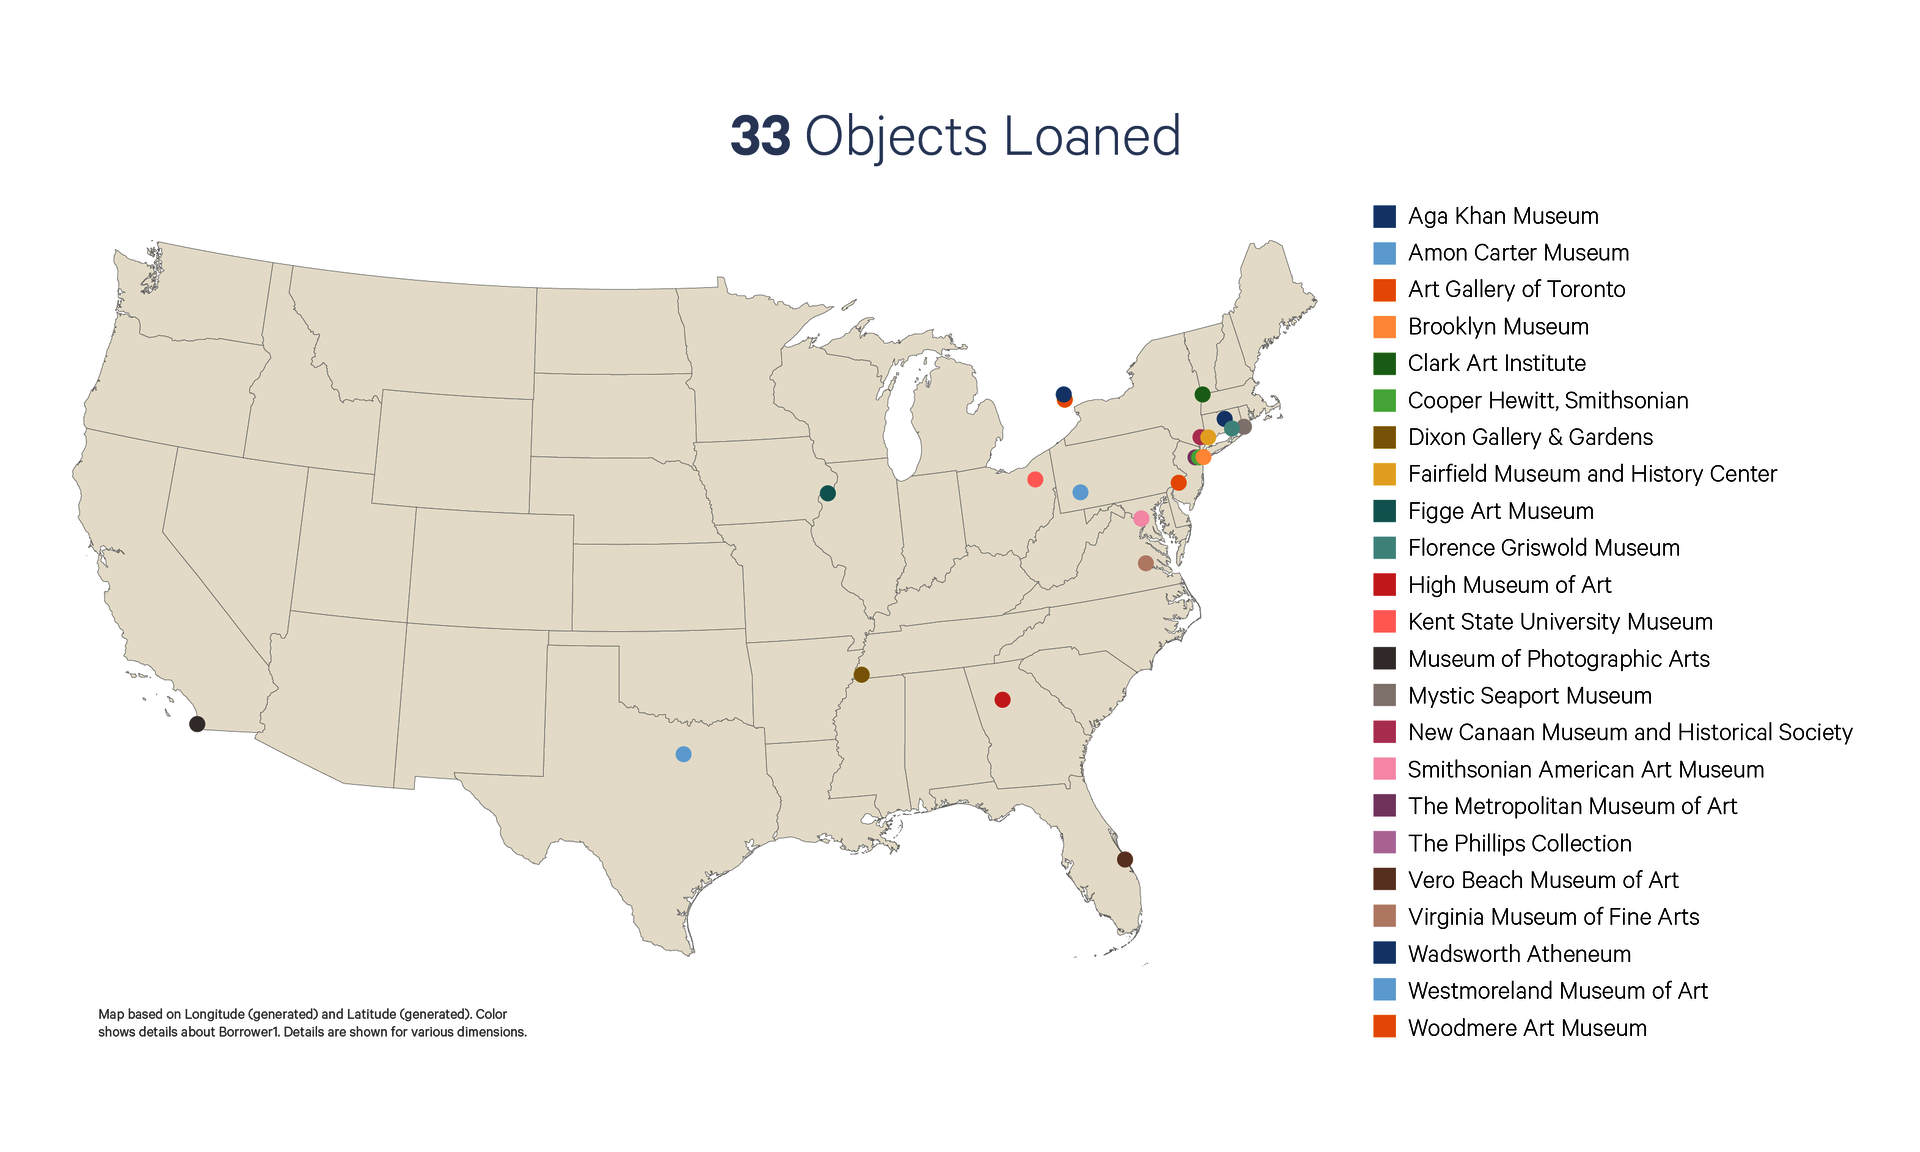 A map of the USA displaying the locations of 33 objects loaned out by the RISD Museum. The map’s label contains a list of the museums.